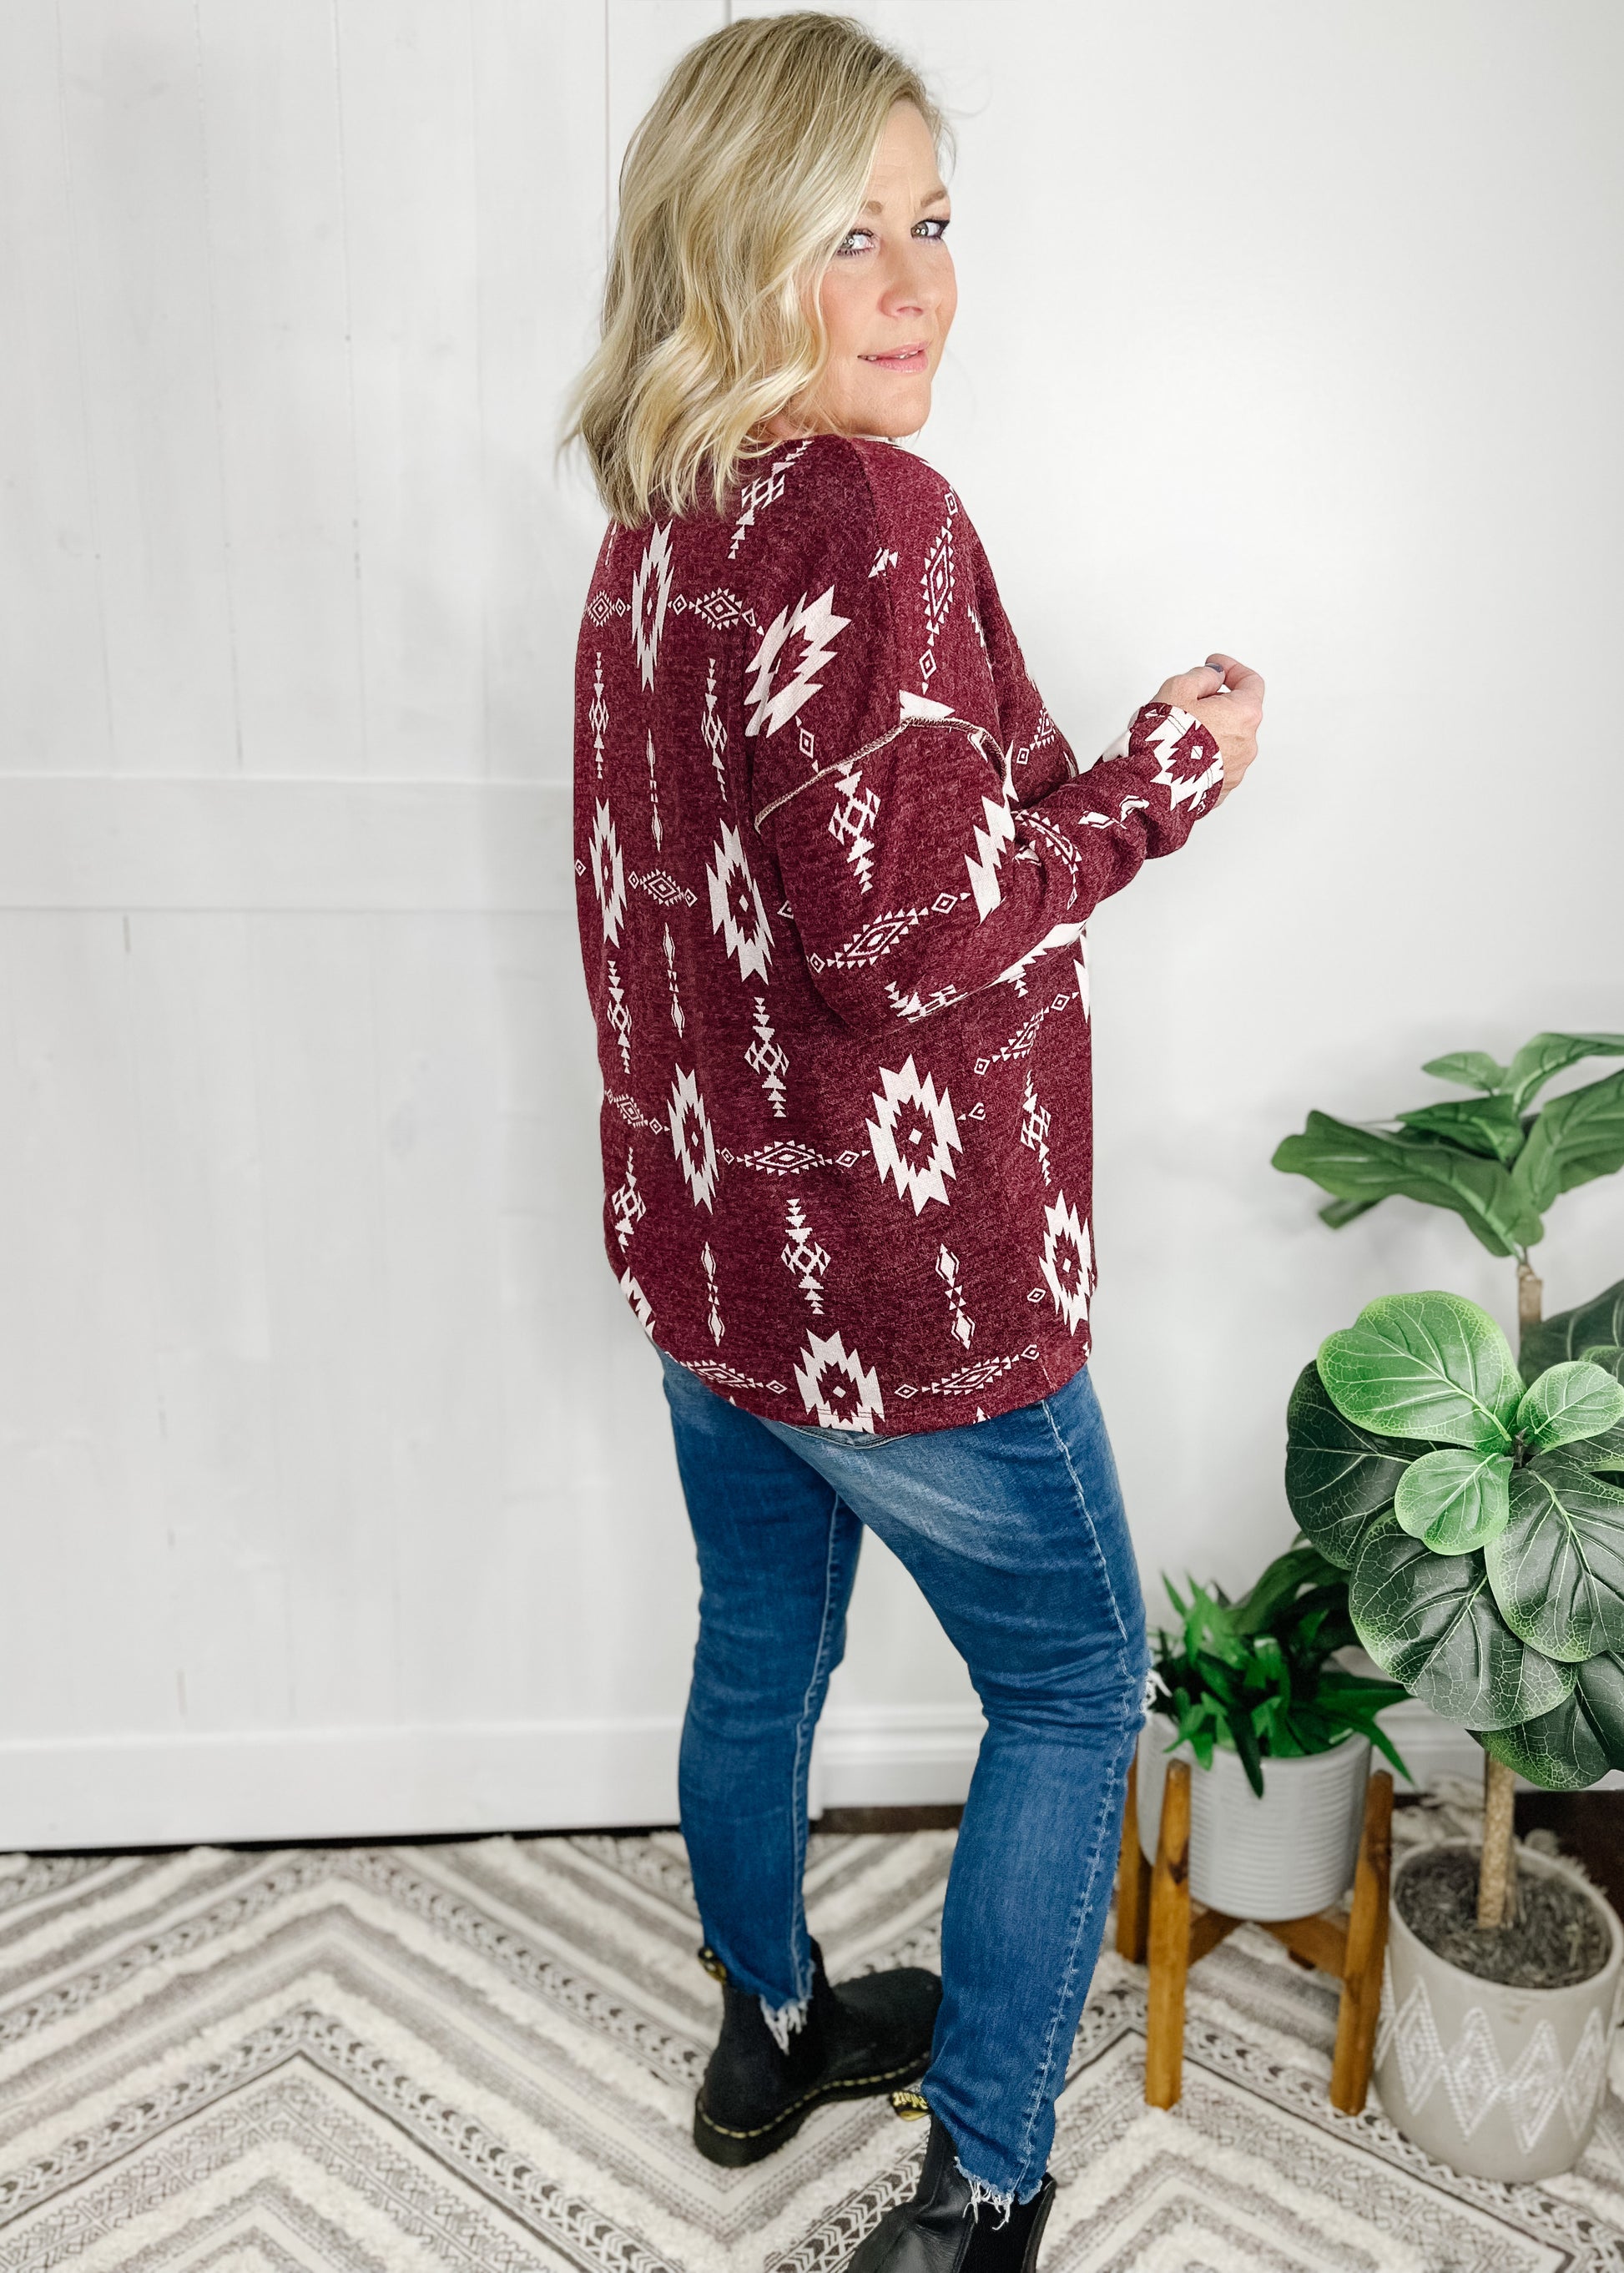 Aztec print top available in Burgundy. Top features, deep v neckline, long sleeves, straight hemline, stitch detail going down front and at shoulder.  Shown with out high rise skinny jeans. 